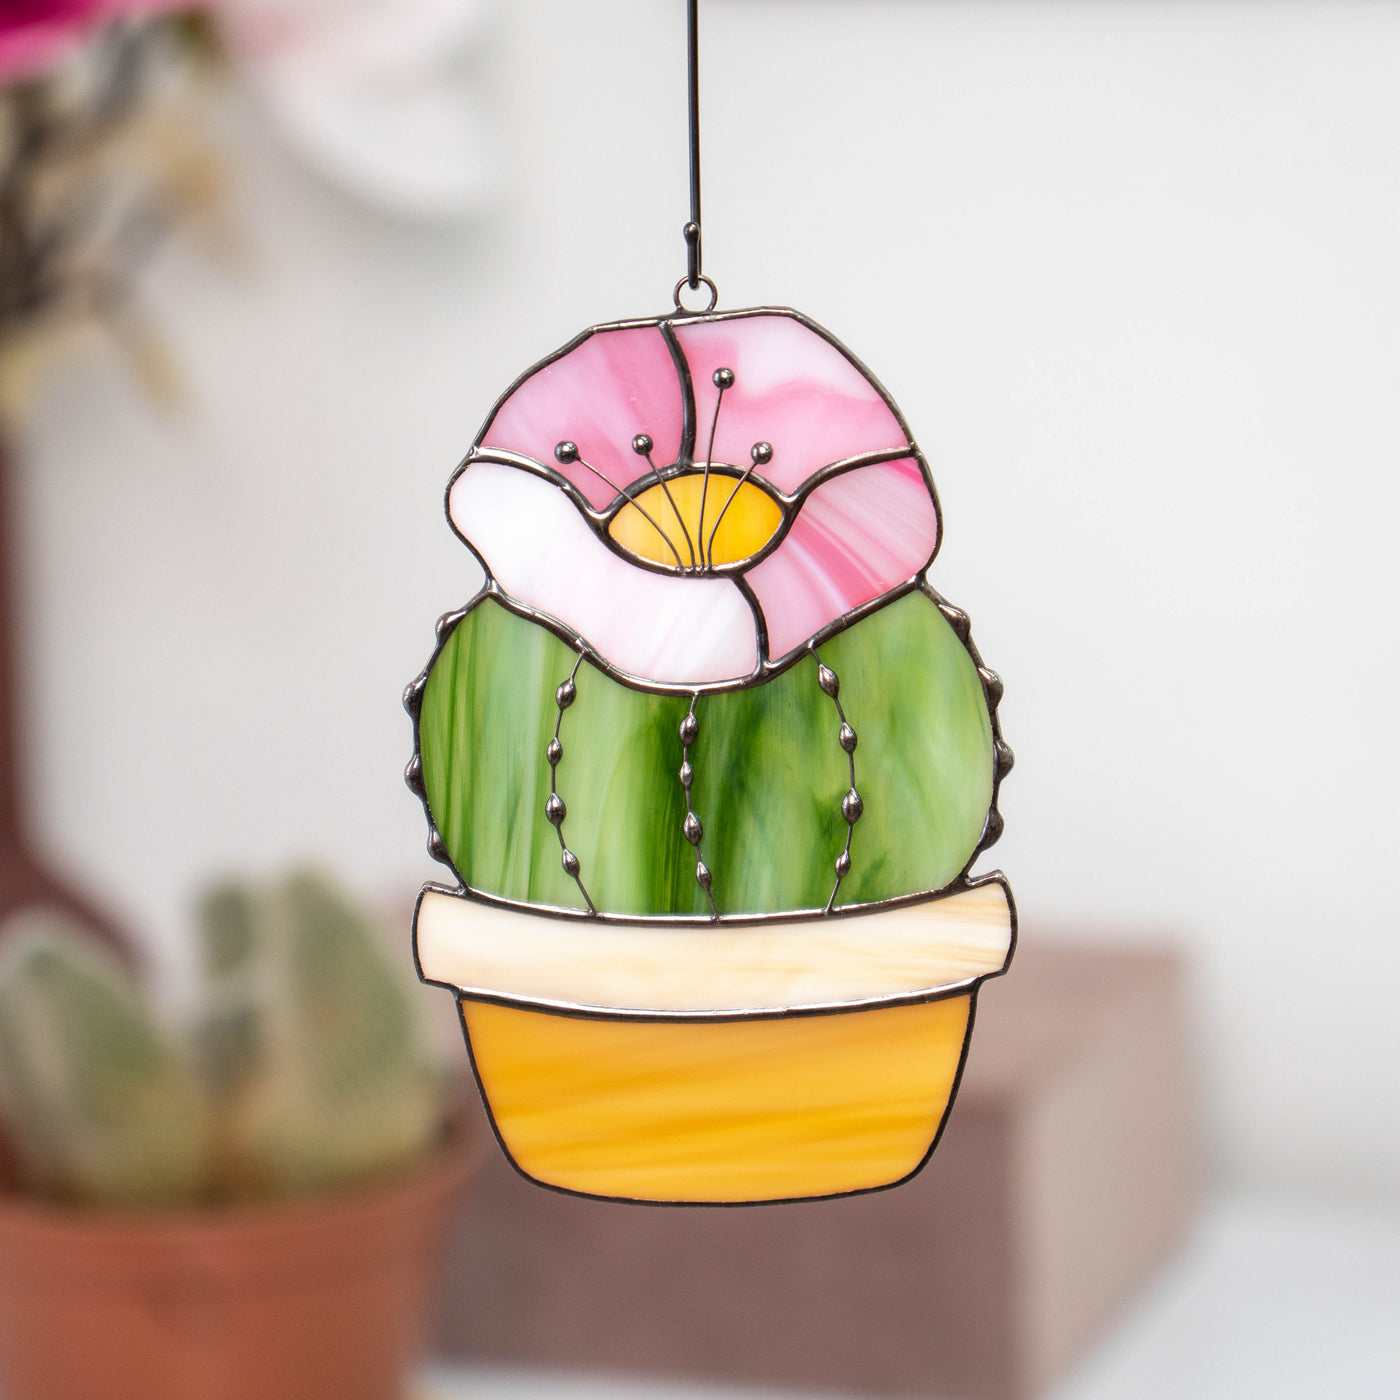 Stained glass window hanging of cactus with pink flower on top